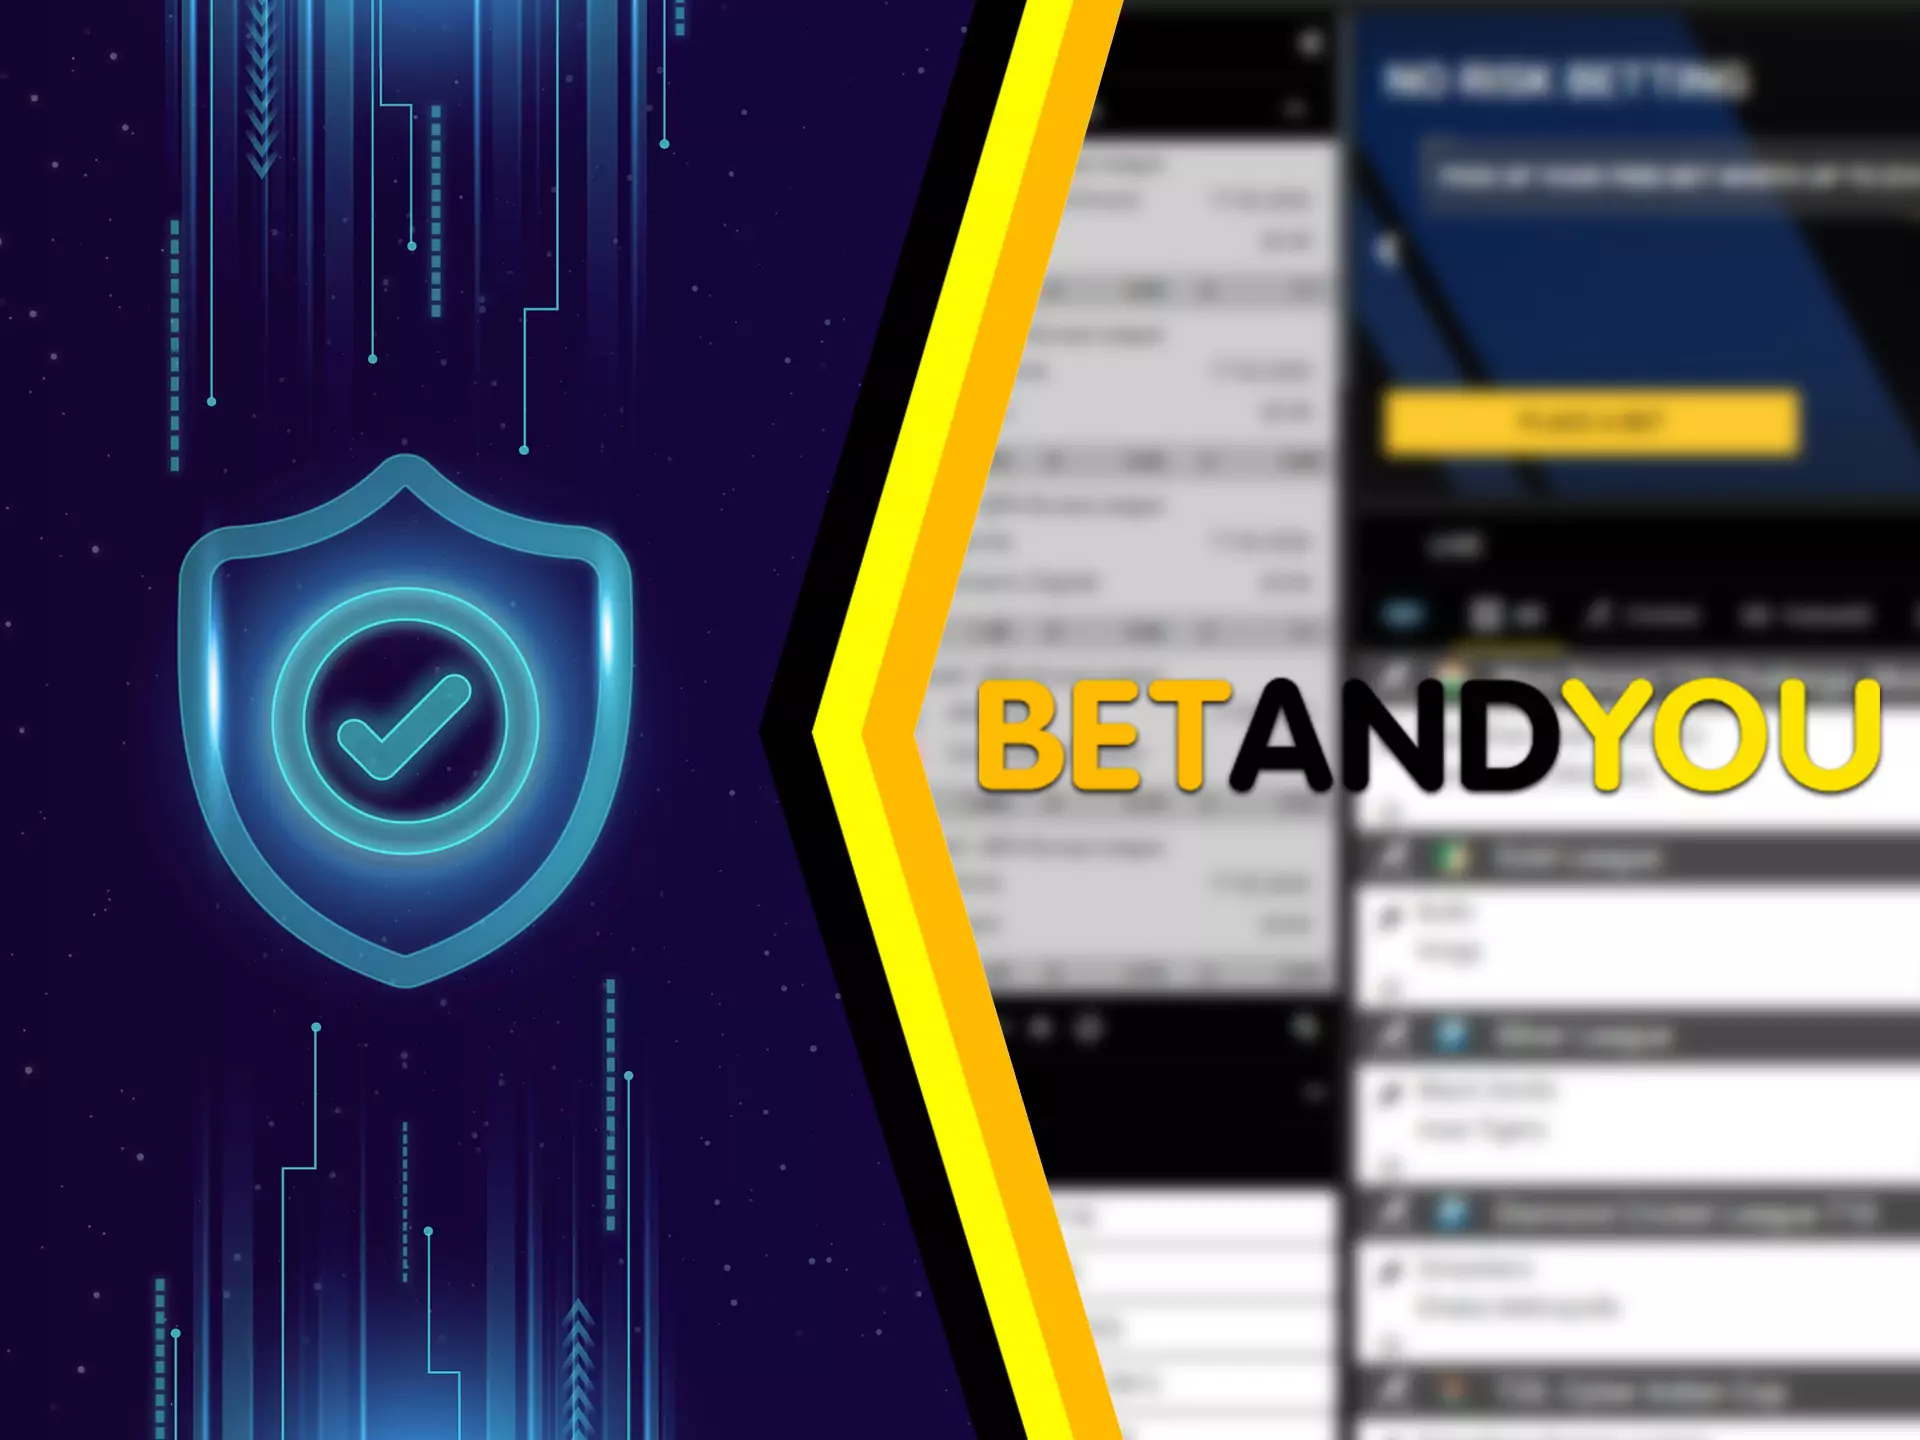 BetAndYou protects user data securely.